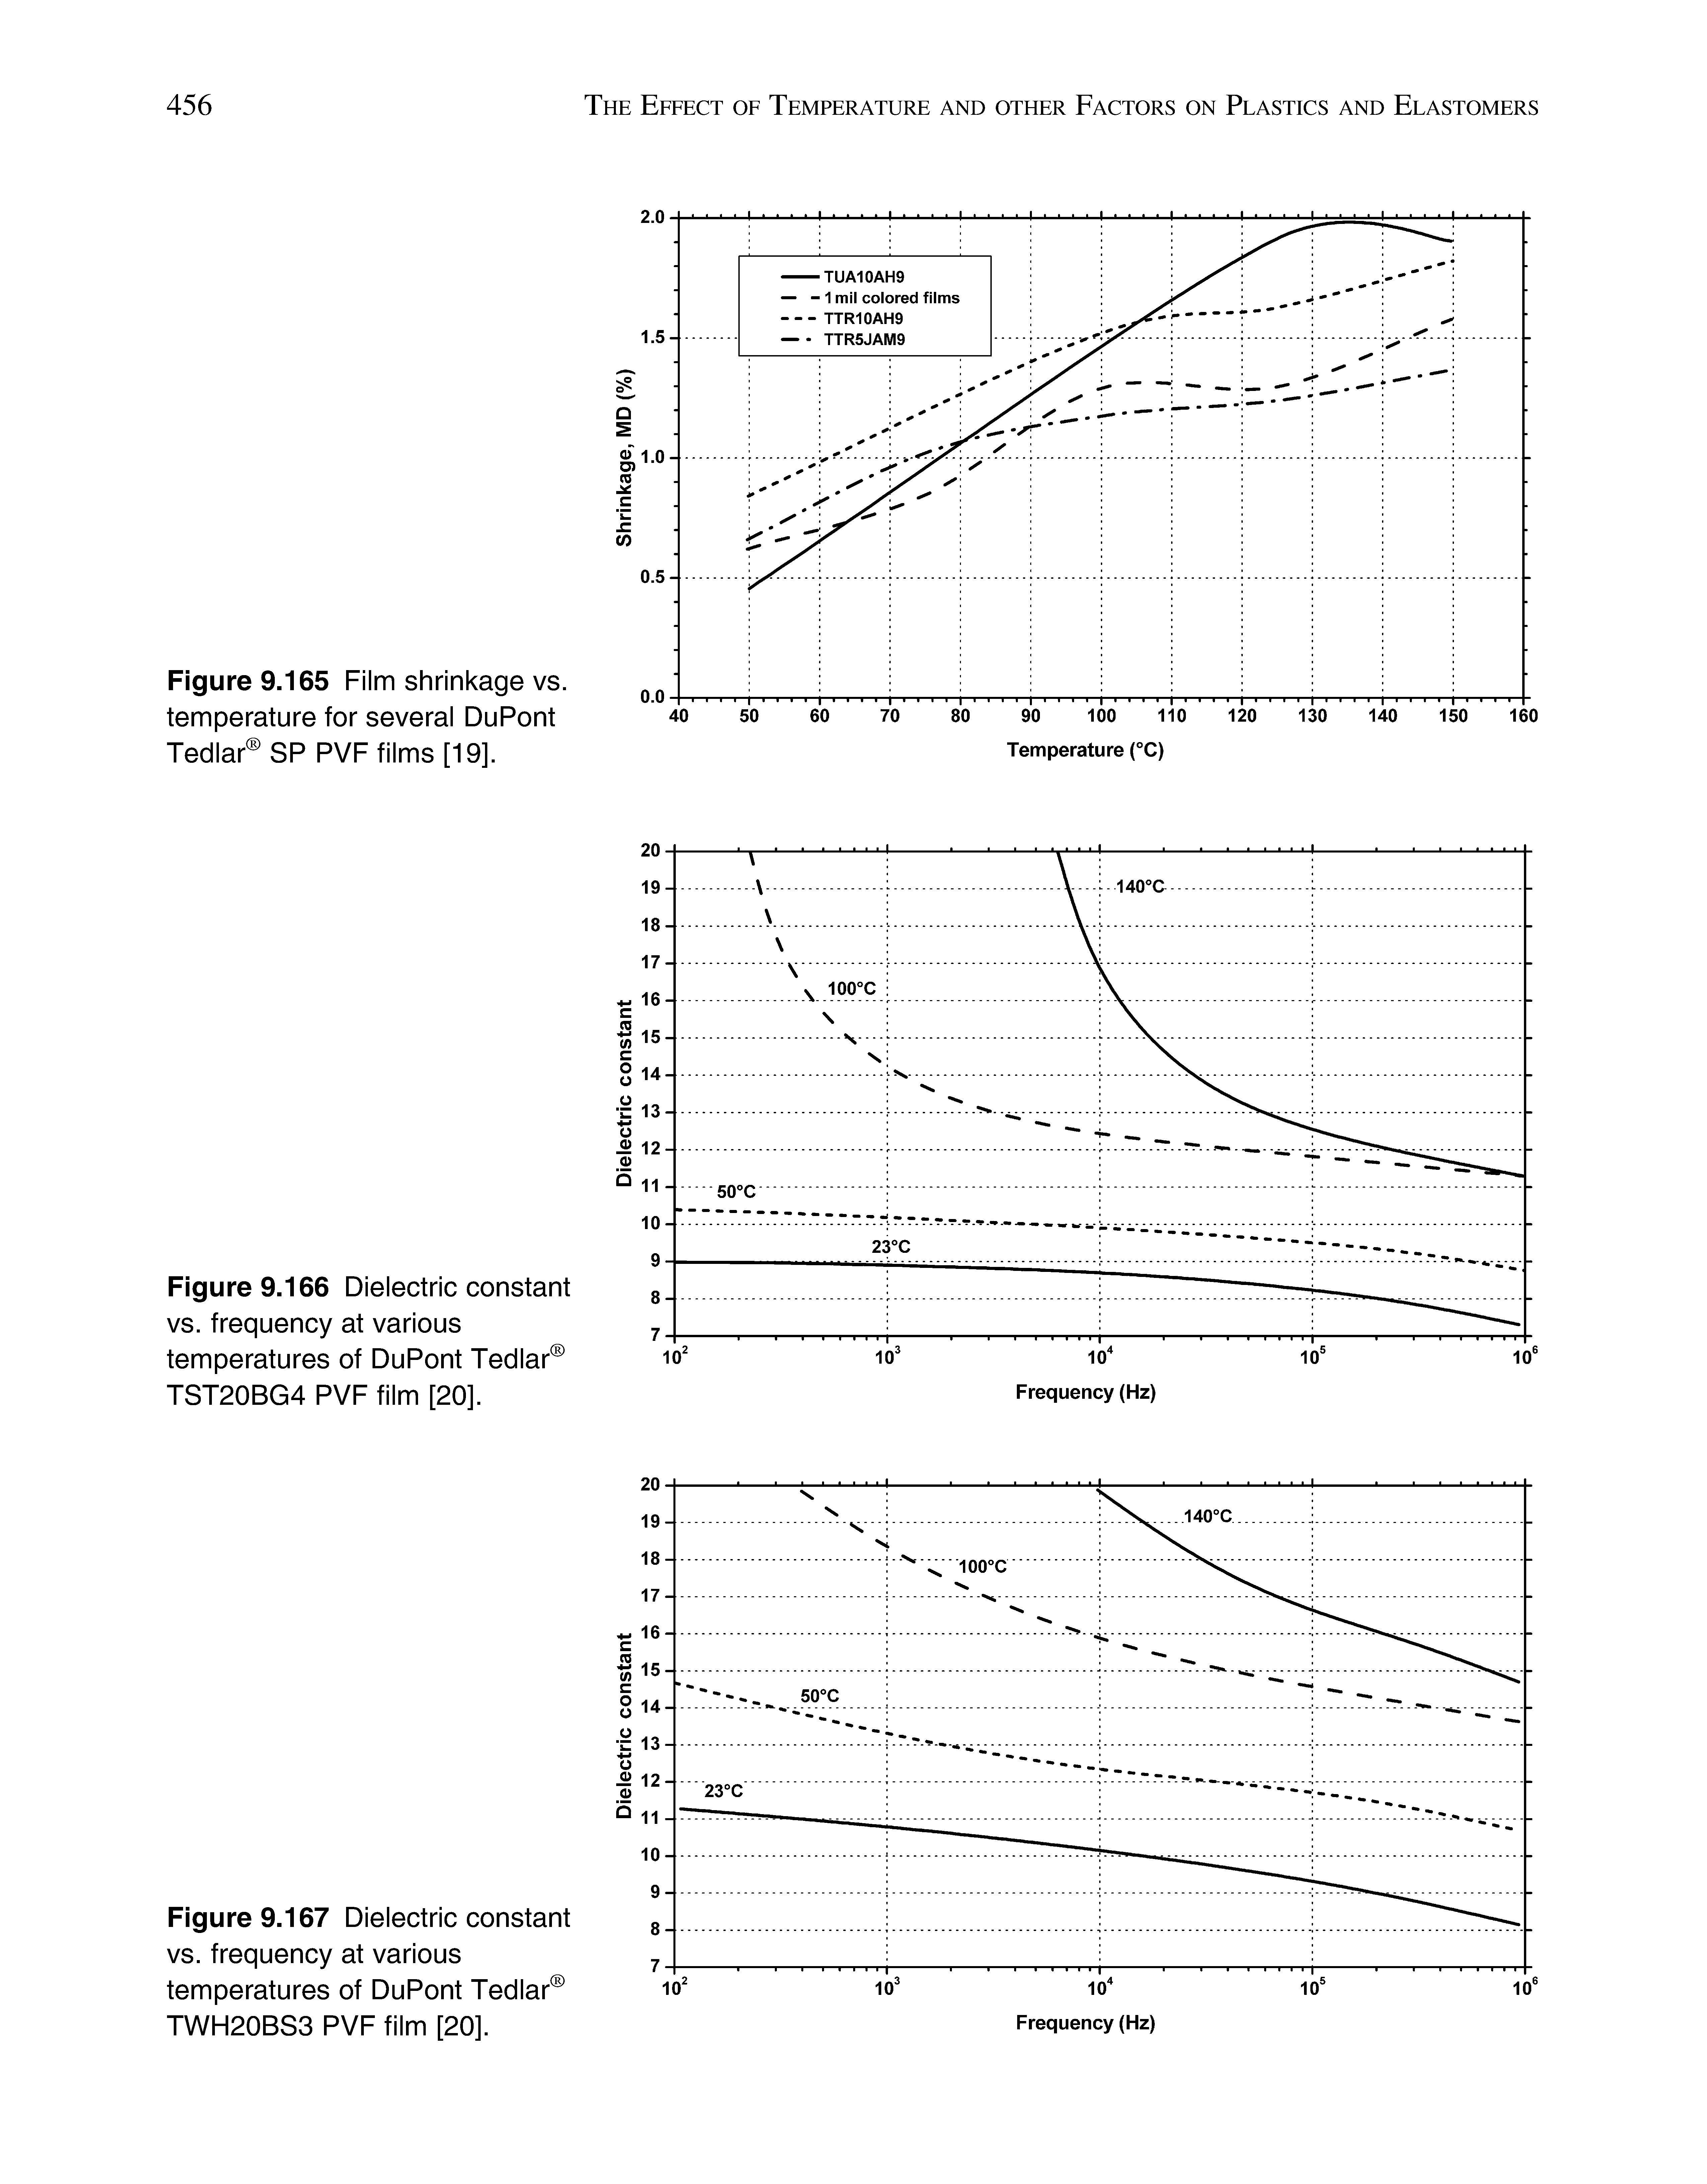 Figure 9.166 Dielectric constant vs. frequency at various temperatures of DuPont Tedlar TST20BG4 PVF film [20].